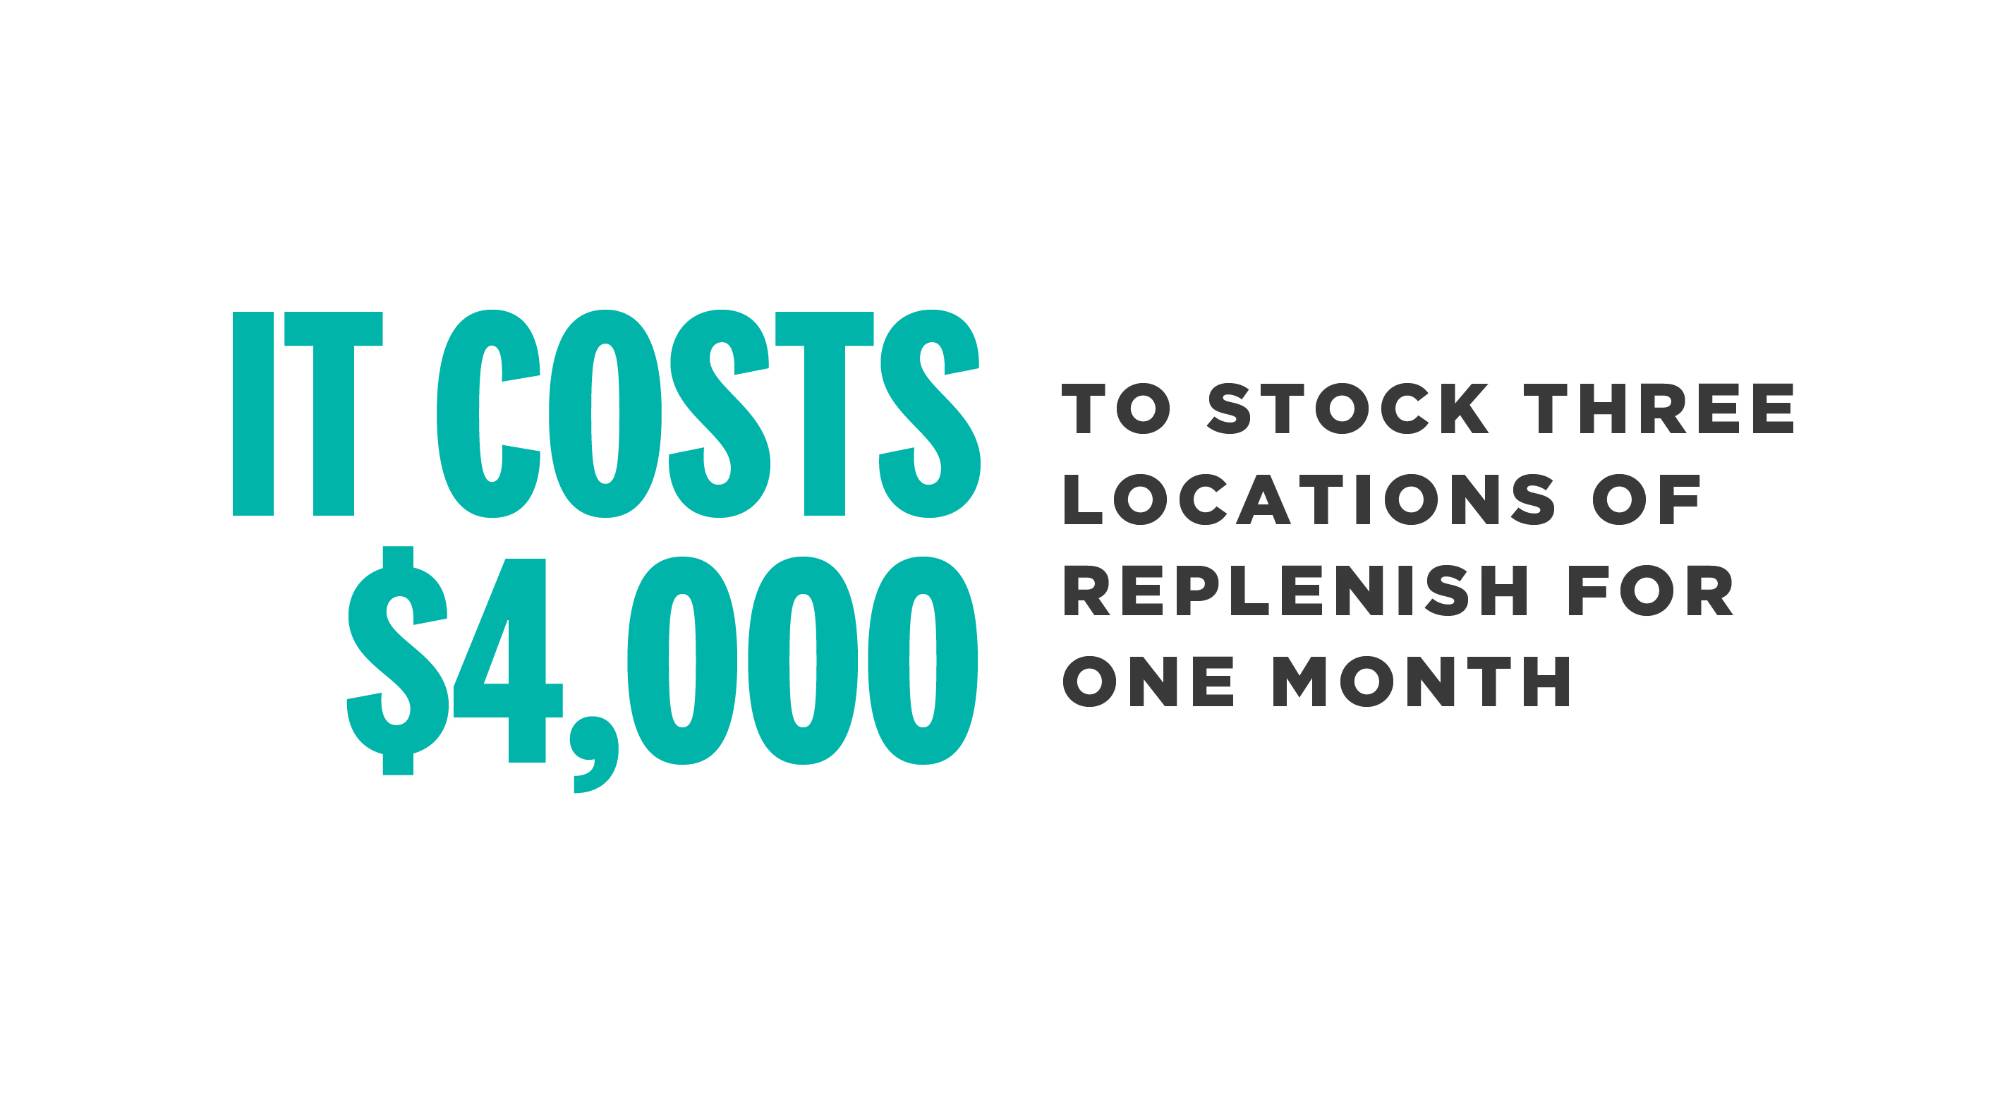 It costs $4,000 to stock three locations of Replenish for just one month